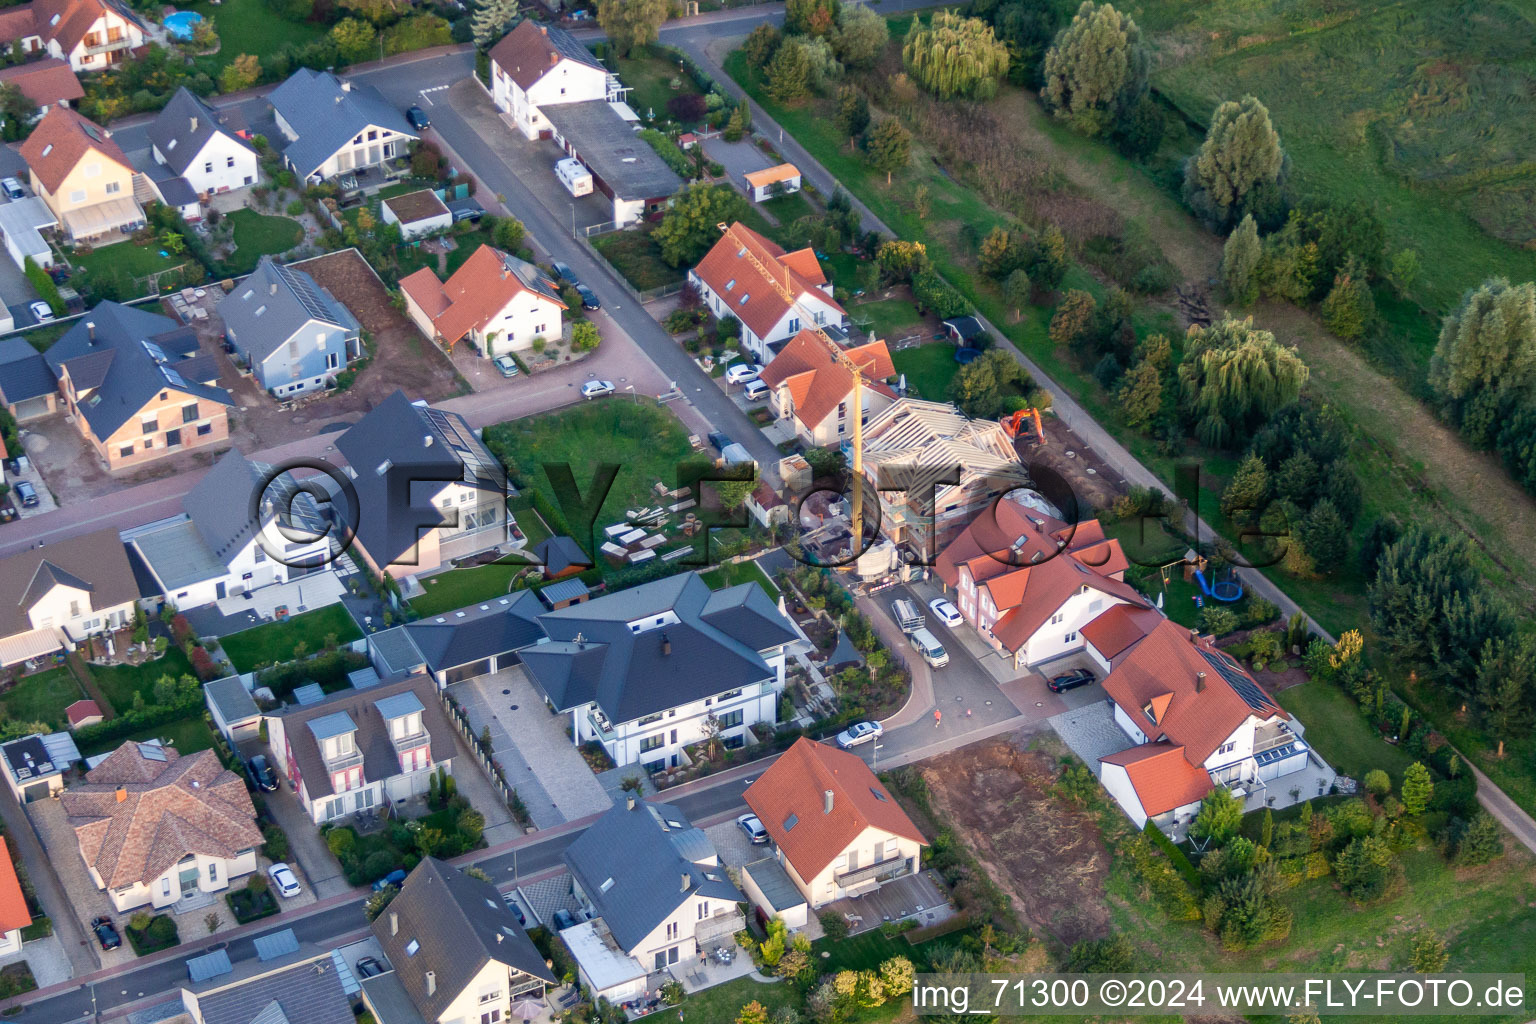 Aerial view of Lorraine Street in Offenbach an der Queich in the state Rhineland-Palatinate, Germany